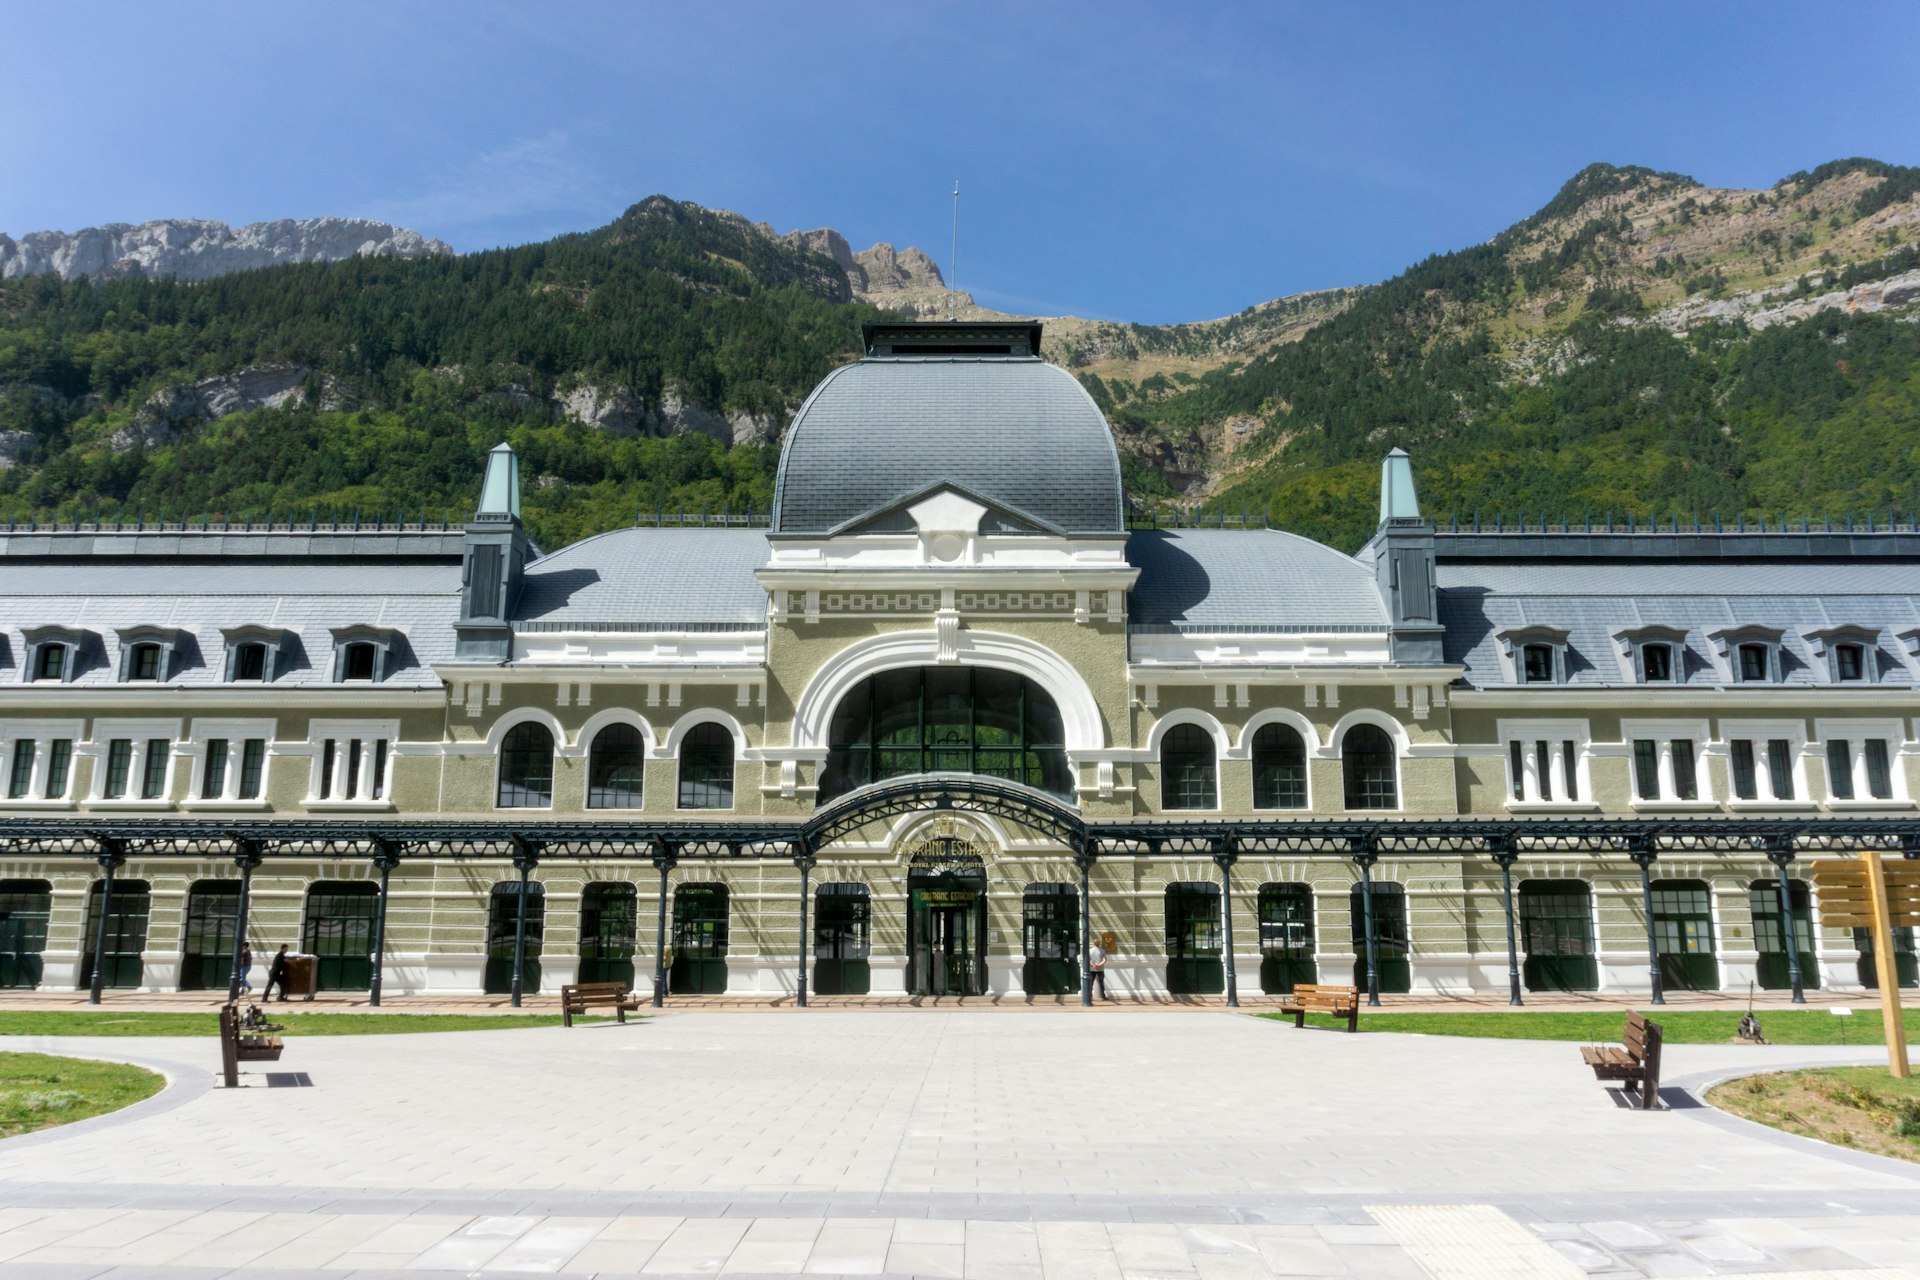 The exterior of a large train station building backed by mountains